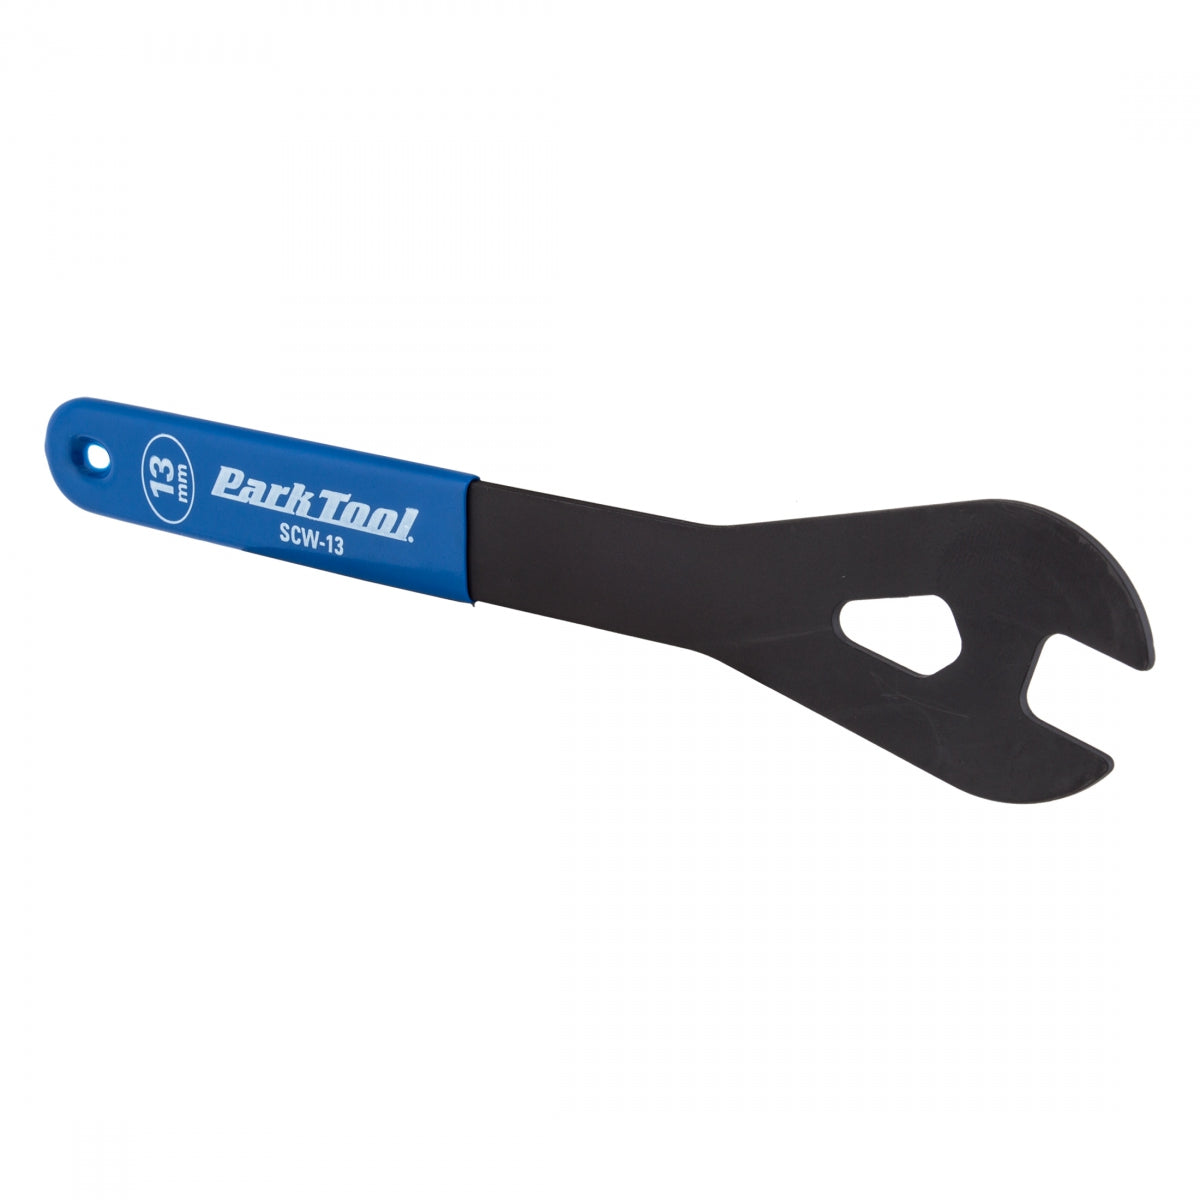 Park Tool #SCW-13 Shop Cone Wrench, 13mm